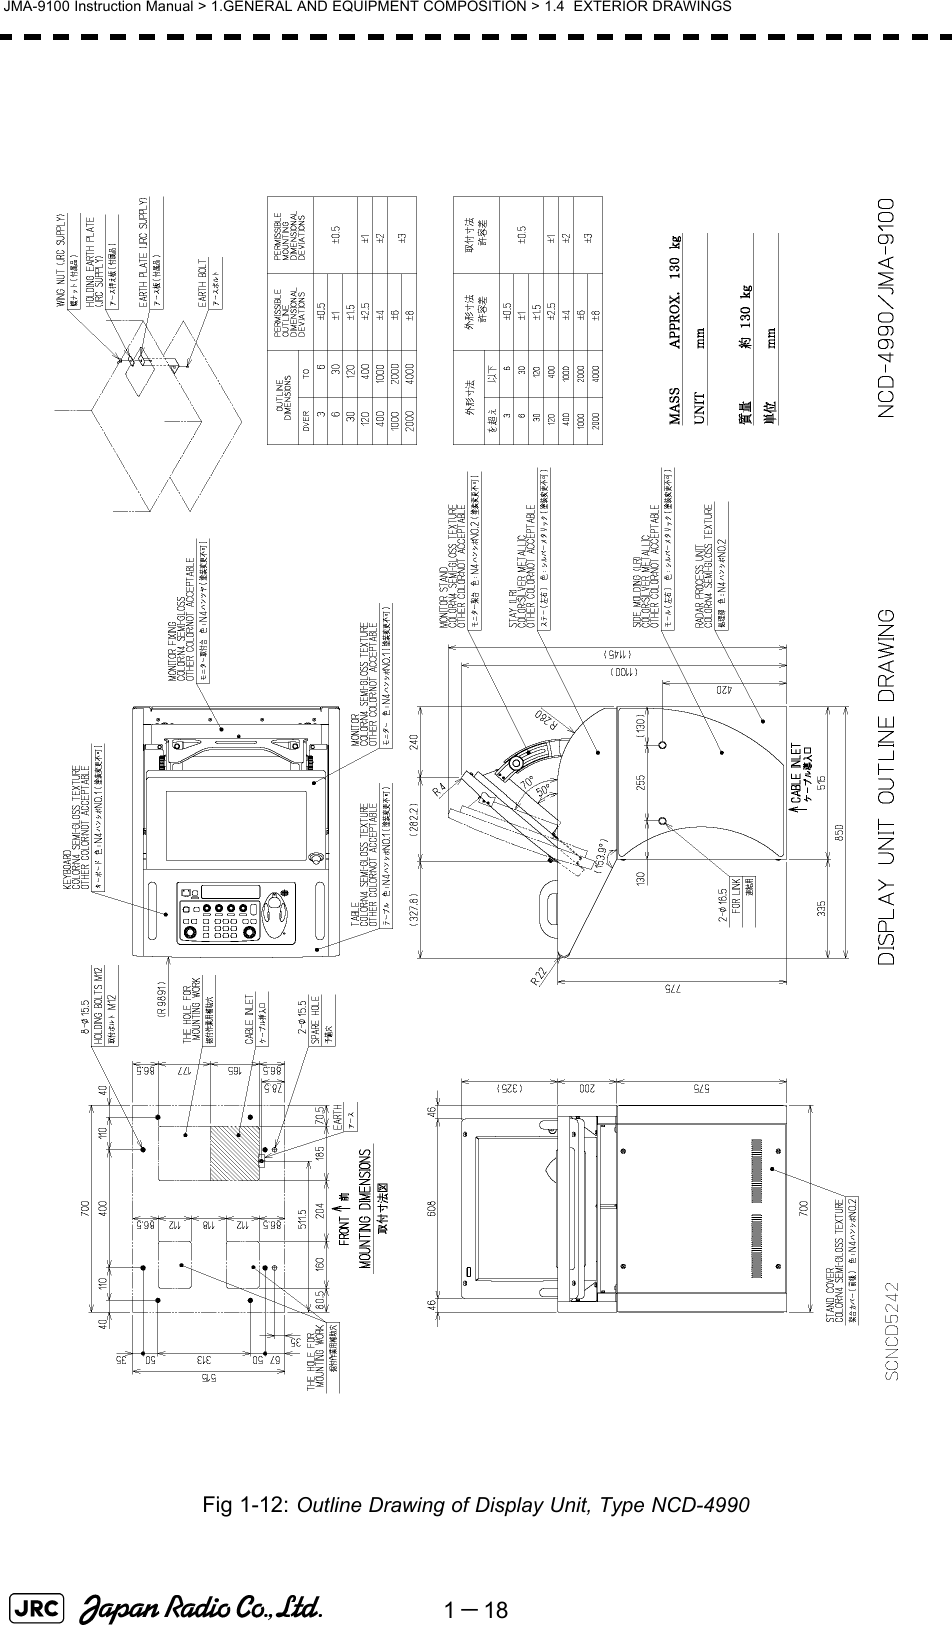 1－18JMA-9100 Instruction Manual &gt; 1.GENERAL AND EQUIPMENT COMPOSITION &gt; 1.4  EXTERIOR DRAWINGSFig 1-12: Outline Drawing of Display Unit, Type NCD-4990